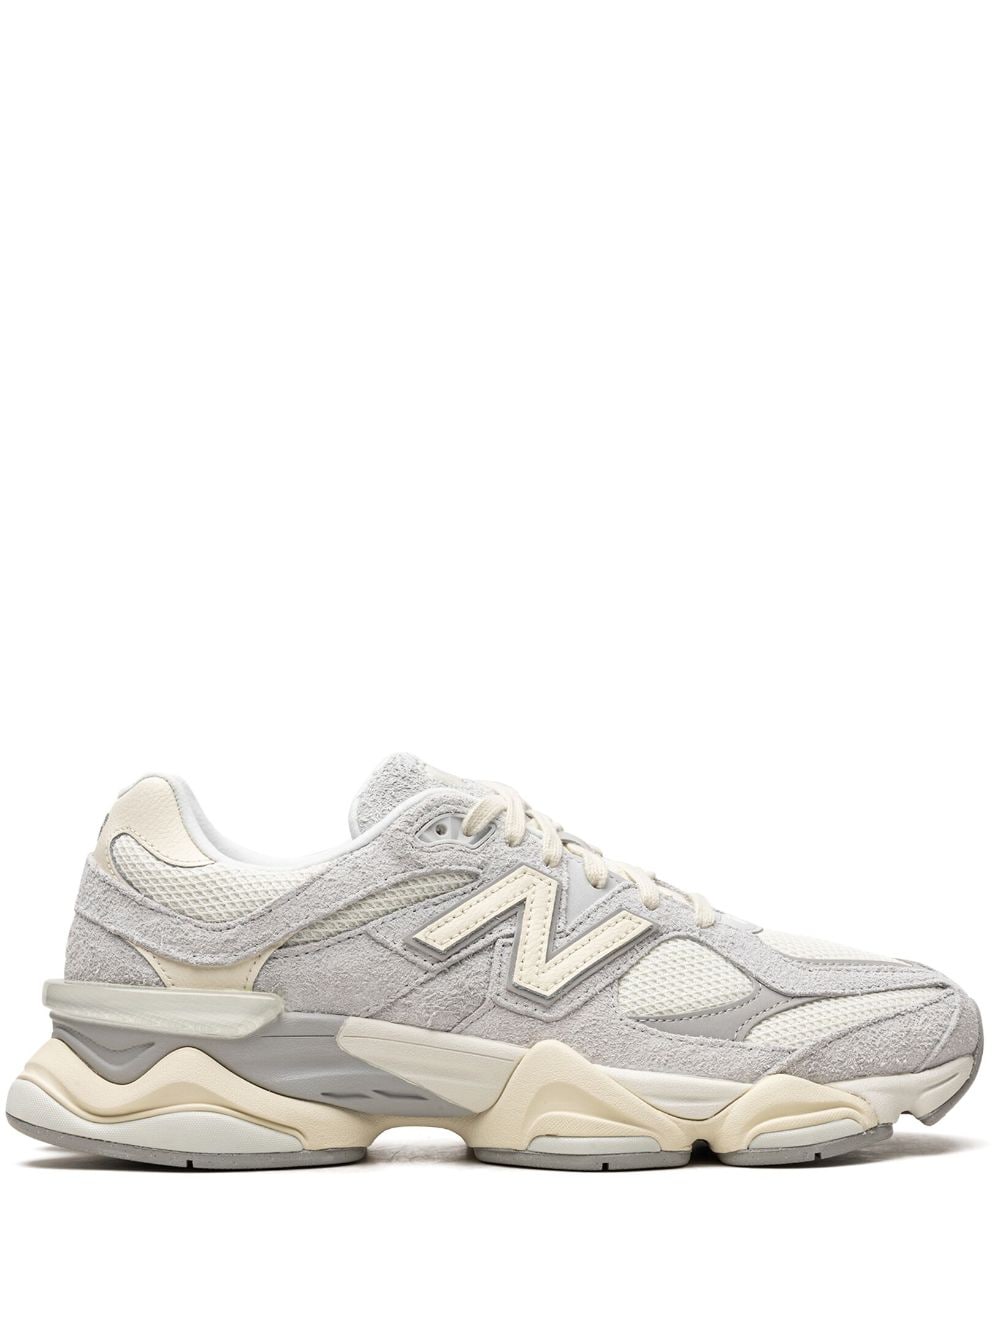 New Balance 9060 sneakers - White